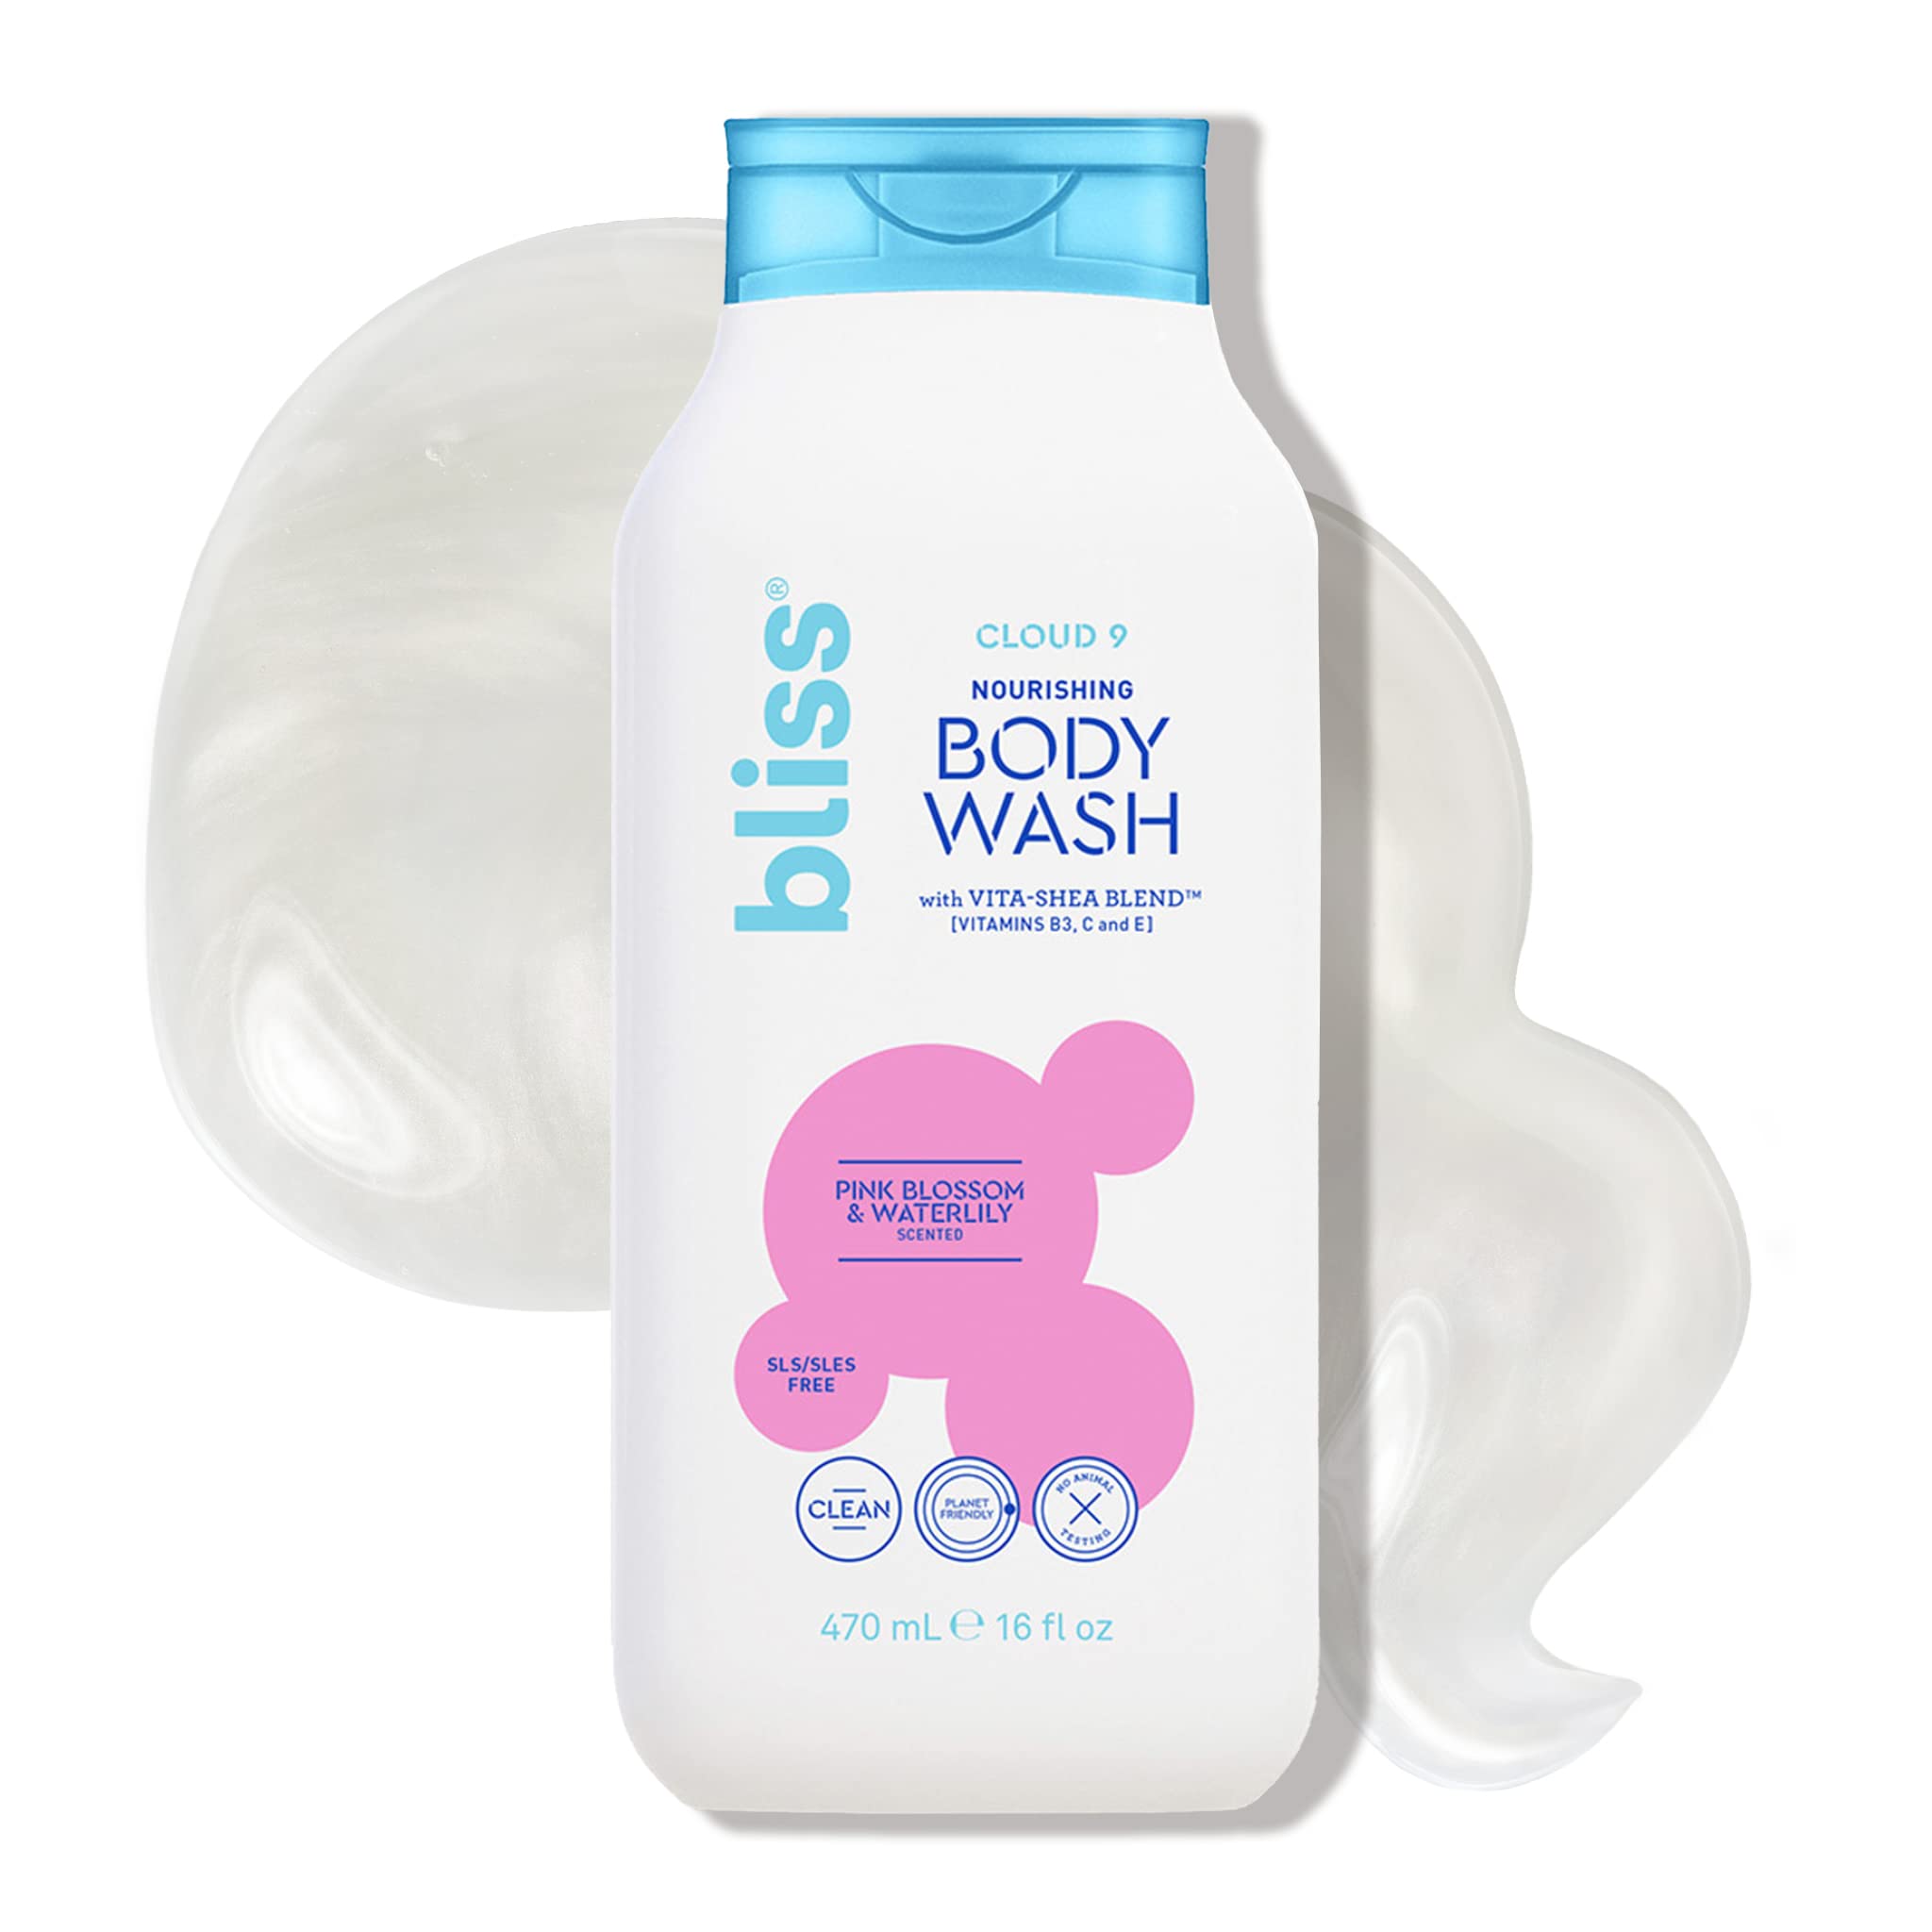 Bliss Cloud 9 Body Wash- Pink Blossom Water Lily scent- Formulated with Vitamins B3, C and E and Shea butter - Gentle & Hydrating for Supremely Soft Skin-16 floz.